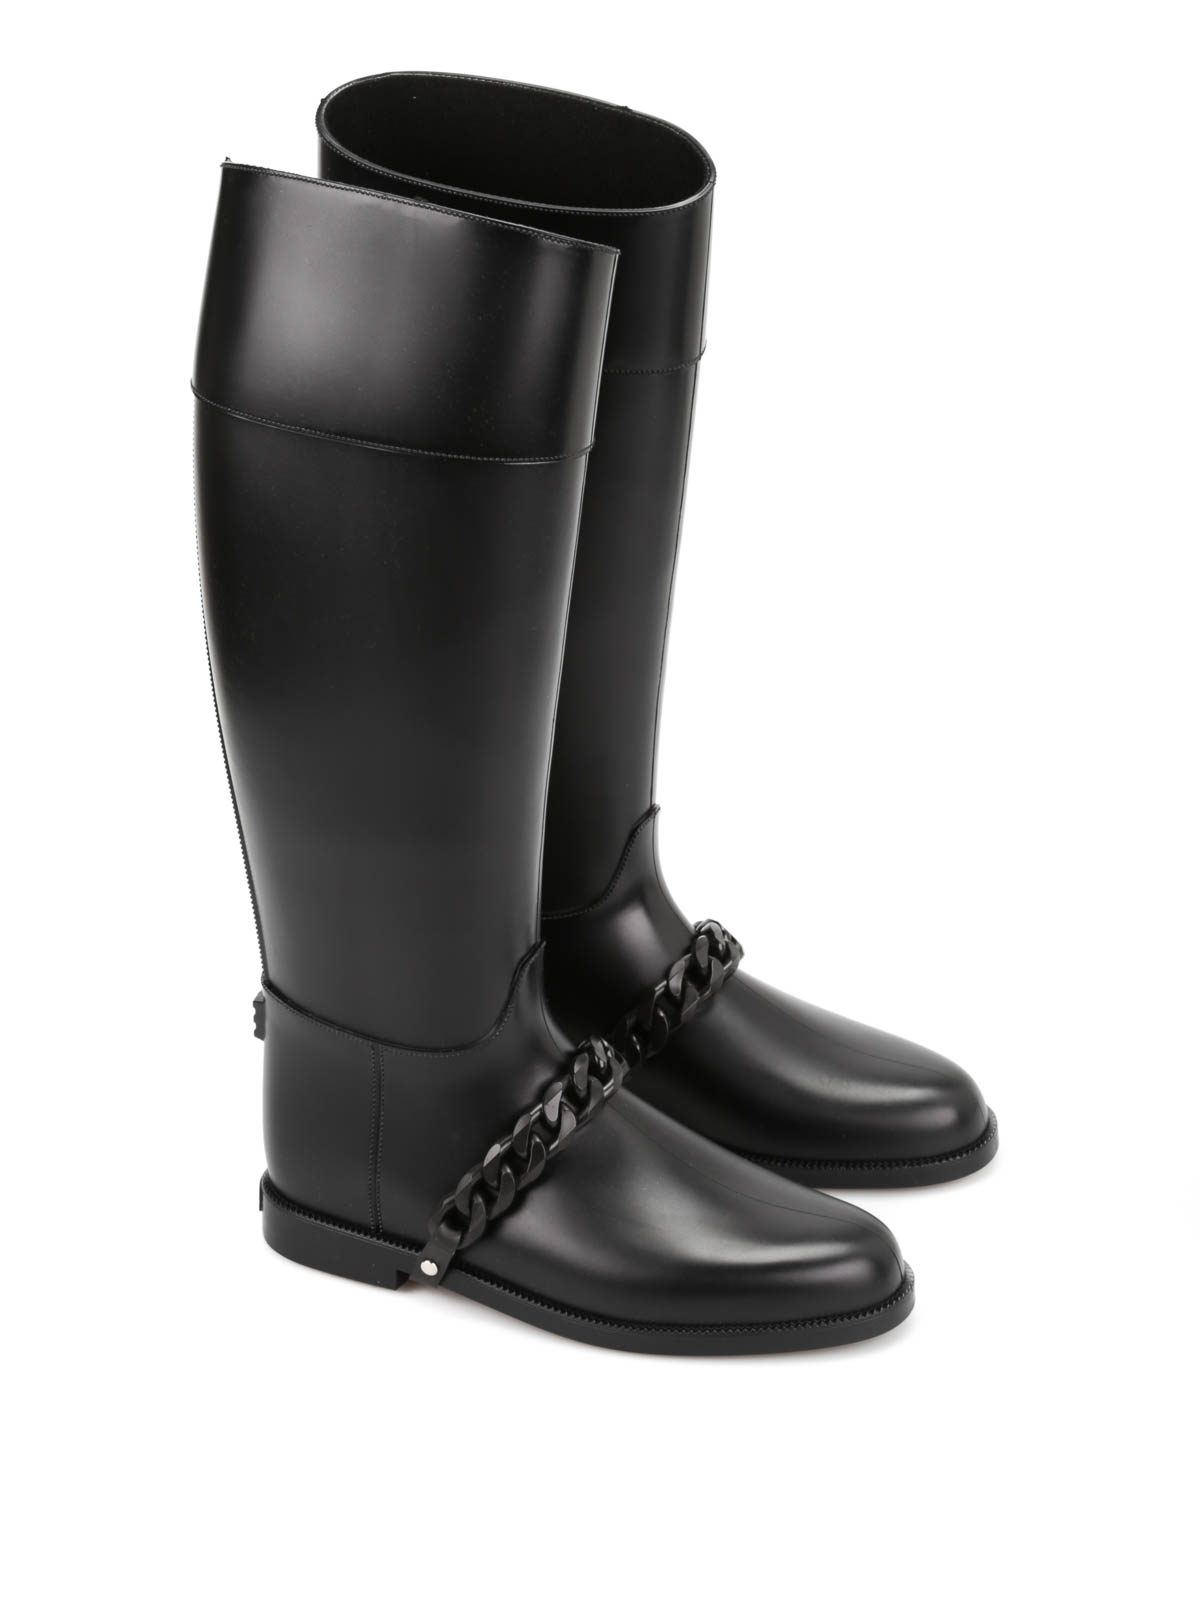 givenchy boots price